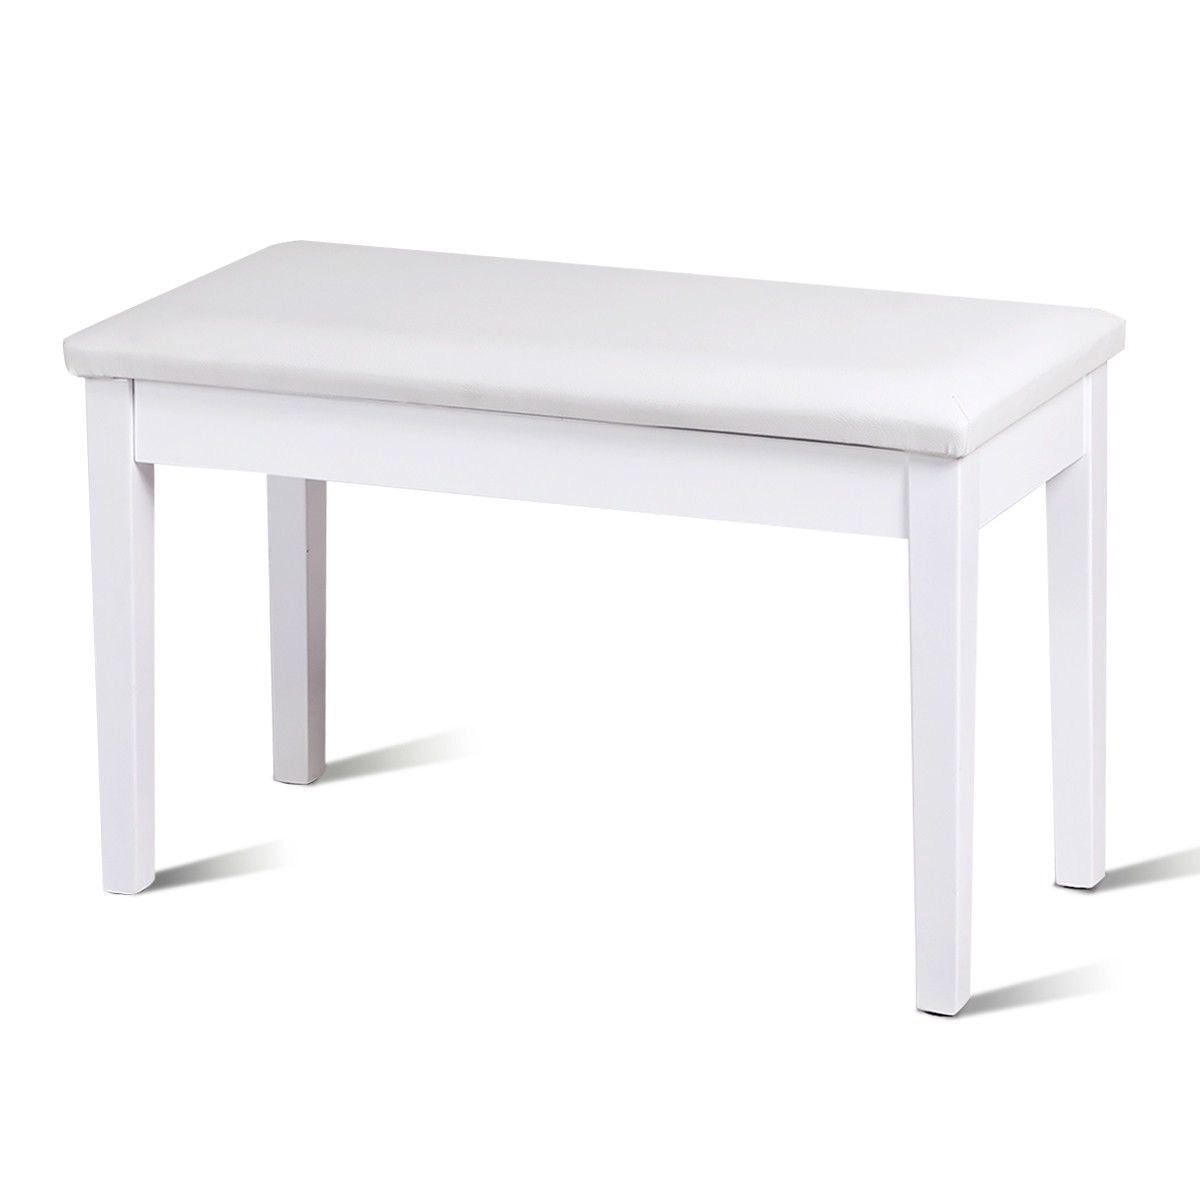 White White Duet Piano Bench Keyboard Padded Seat with Storage High-Gloss PU Finish Solid Wood Frame Legs US Delivery 